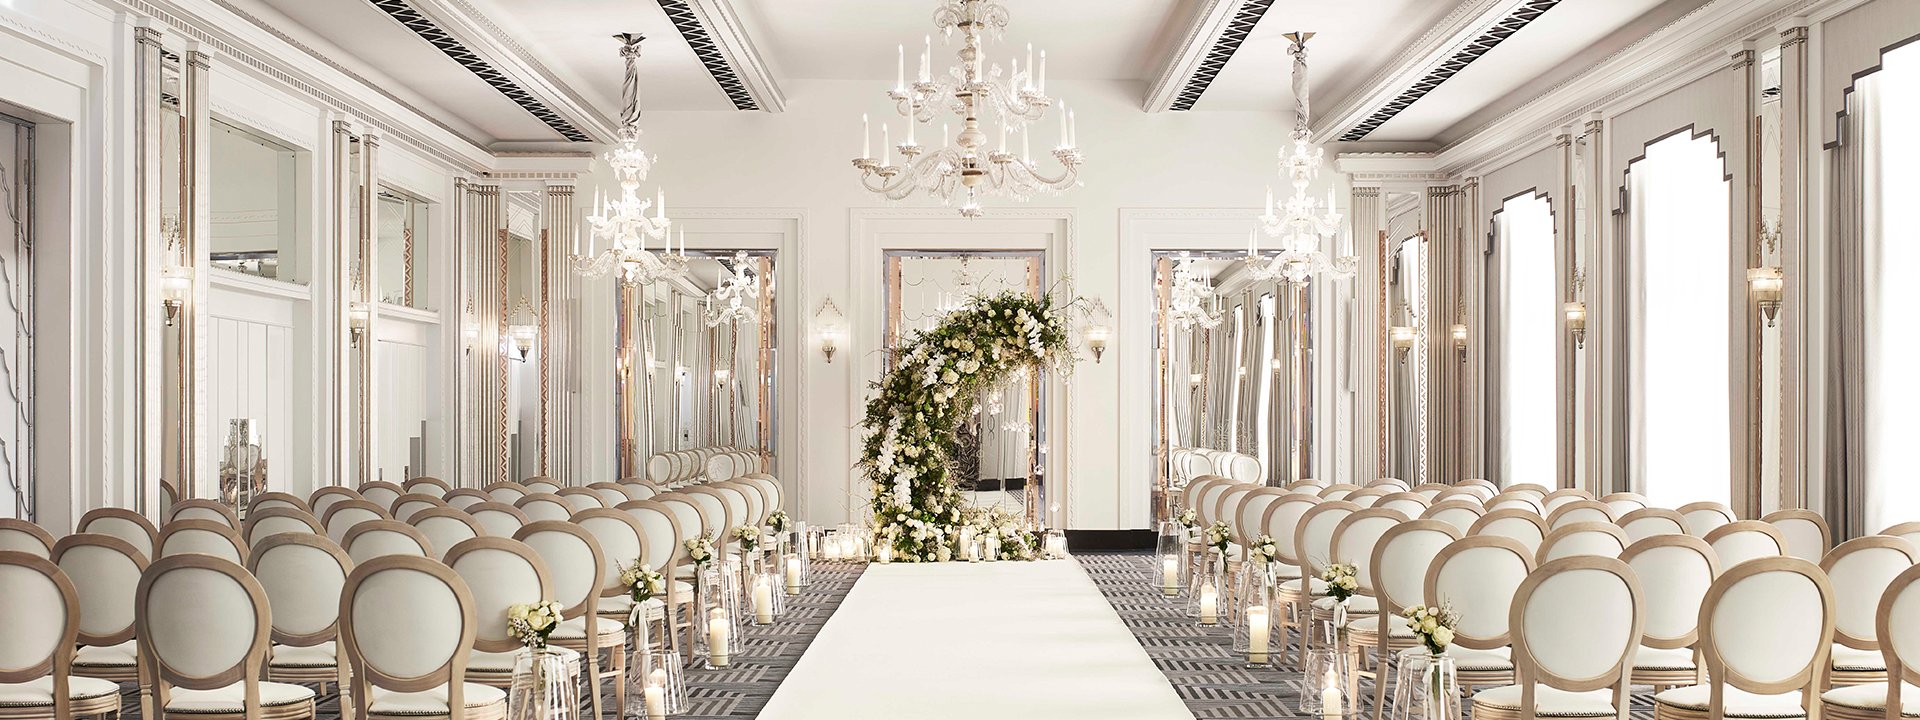 A luxurious space for a wedding in beige and champagne colours, with lots of comfortable chairs decorated with flowers.